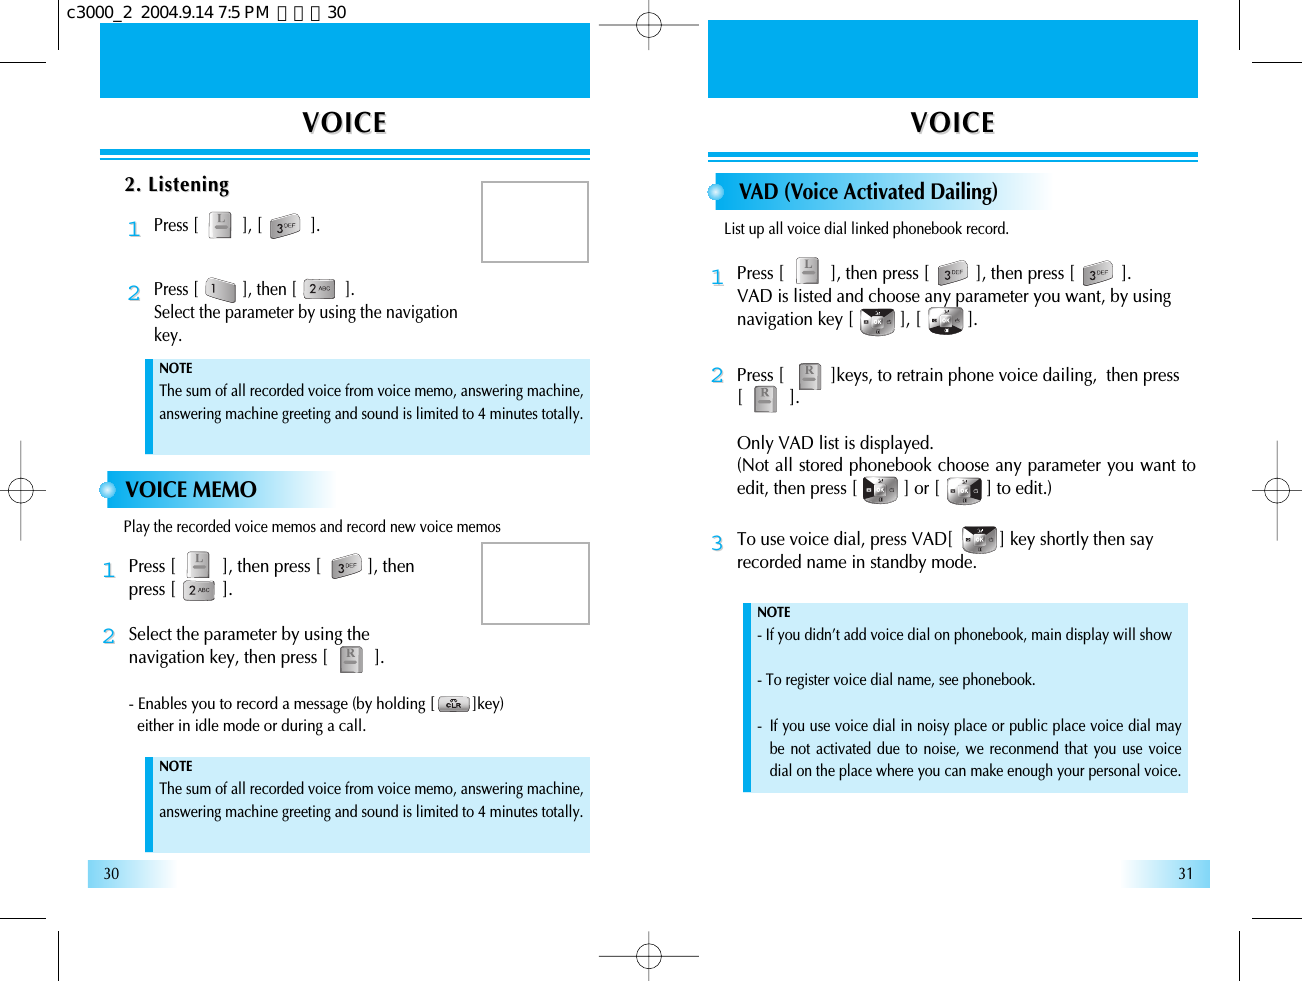 VOICEVOICE VOICEVOICE3130VOICE MEMOPress [          ], then press [          ], then press [          ].Select the parameter by using the navigation key, then press [          ].- Enables you to record a message (by holding [         ]key) either in idle mode or during a call.1122VAD (Voice Activated Dailing)Press [          ], then press [          ], then press [          ].VAD is listed and choose any parameter you want, by using navigation key [          ], [          ].NOTE- If you didn’t add voice dial on phonebook, main display will show - To register voice dial name, see phonebook.-  If you use voice dial in noisy place or public place voice dial maybe not activated due to noise, we reconmend that you use voicedial on the place where you can make enough your personal voice.NOTEThe sum of all recorded voice from voice memo, answering machine,answering machine greeting and sound is limited to 4 minutes totally.NOTEThe sum of all recorded voice from voice memo, answering machine,answering machine greeting and sound is limited to 4 minutes totally.11To use voice dial, press VAD[          ] key shortly then sayrecorded name in standby mode.33Press [          ]keys, to retrain phone voice dailing,  then press [          ].Only VAD list is displayed.(Not all stored phonebook choose any parameter you want toedit, then press [          ] or [          ] to edit.)222. Listening2. ListeningPress [          ], [           ].11Press [          ], then [           ].Select the parameter by using the navigation key.22Play the recorded voice memos and record new voice memosList up all voice dial linked phonebook record.c3000_2  2004.9.14 7:5 PM  페이지30